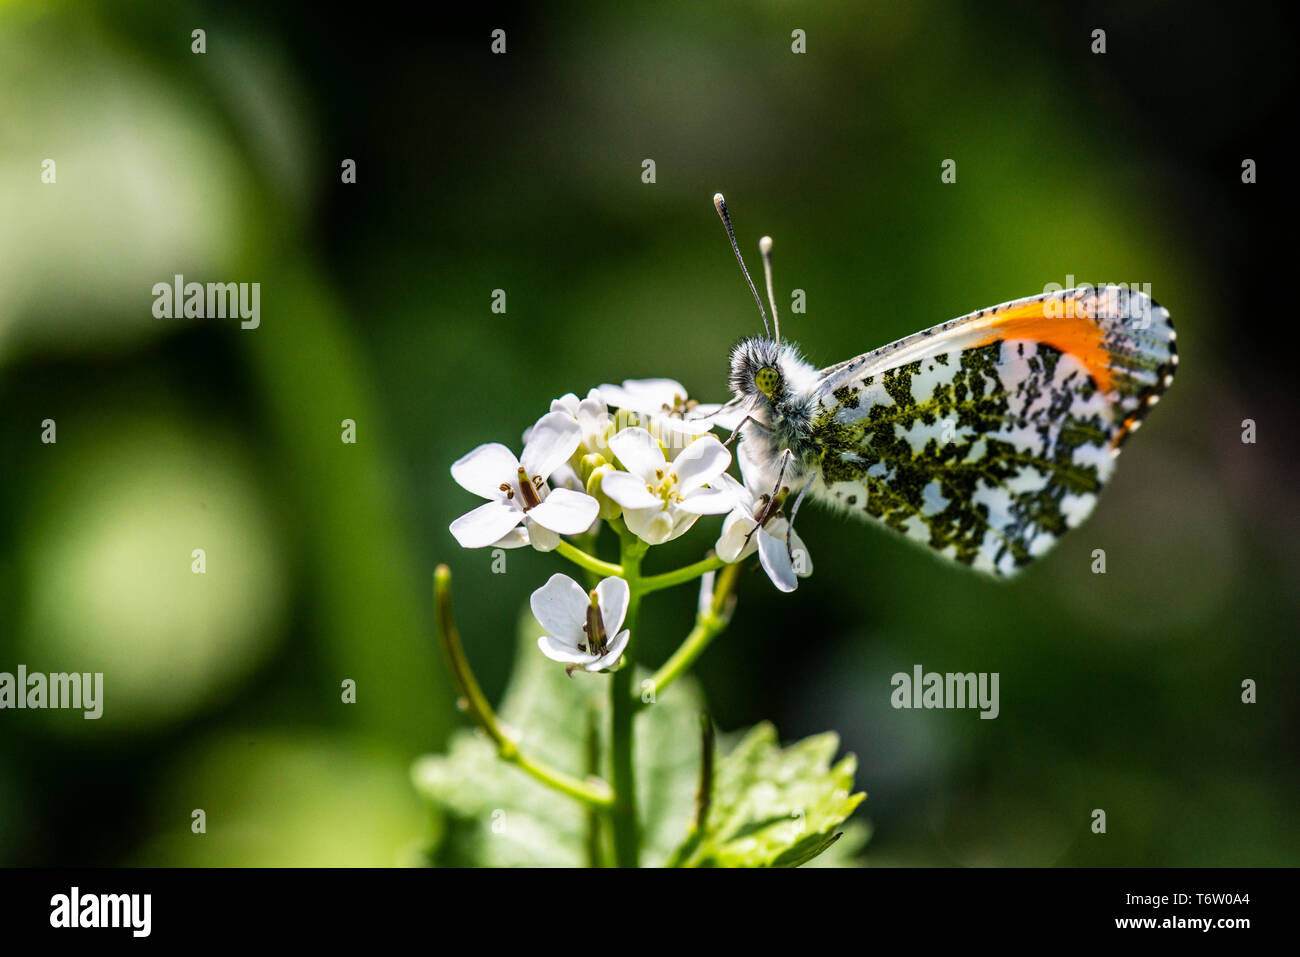 A male orange tip butterfly (Anthocharis cardamines) on the flower of a Jack-by-the-hedge (Alliaria petiolata) Stock Photo